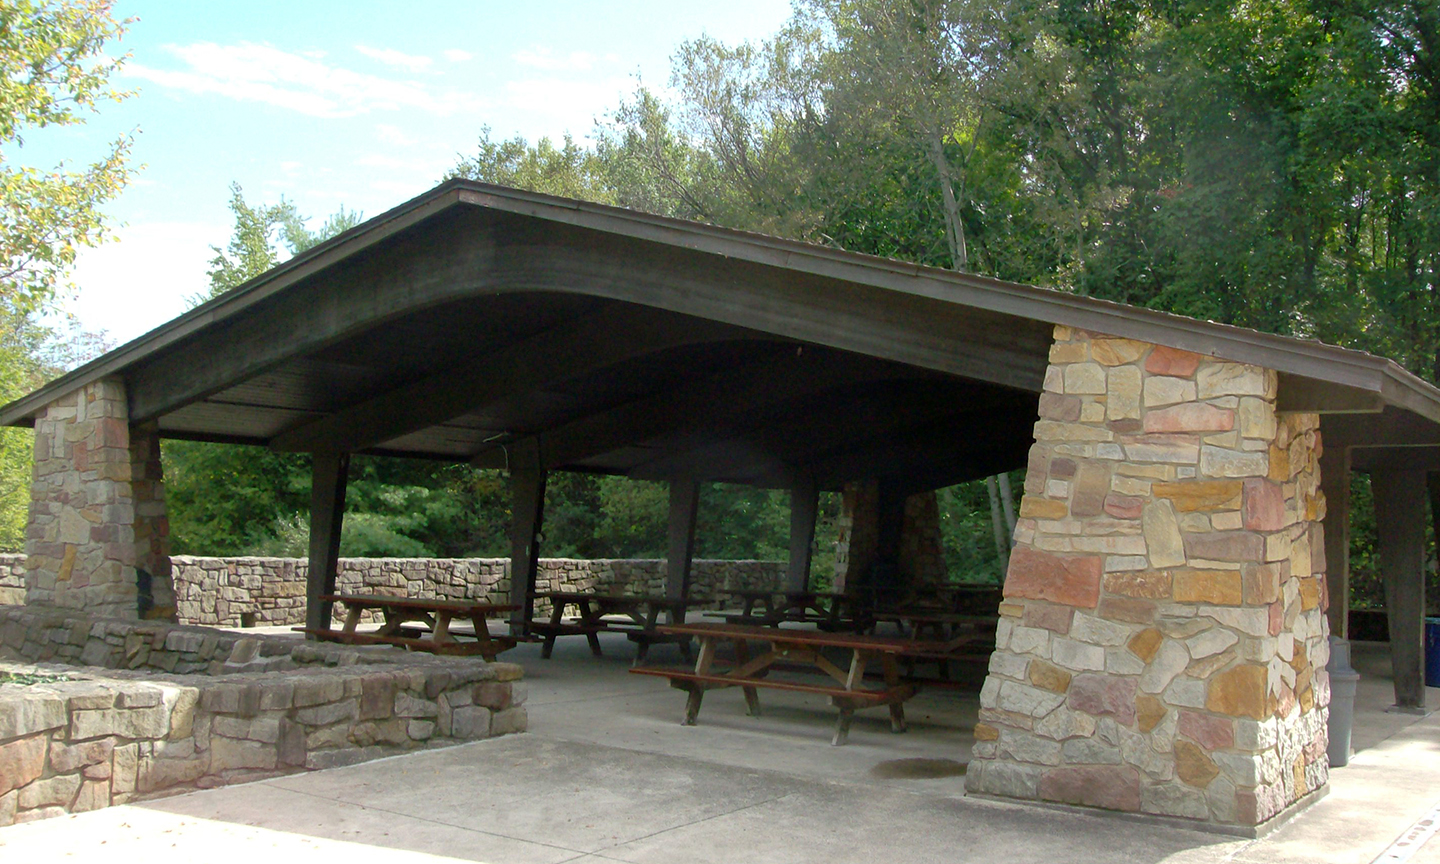 Royalview Reserved Shelter